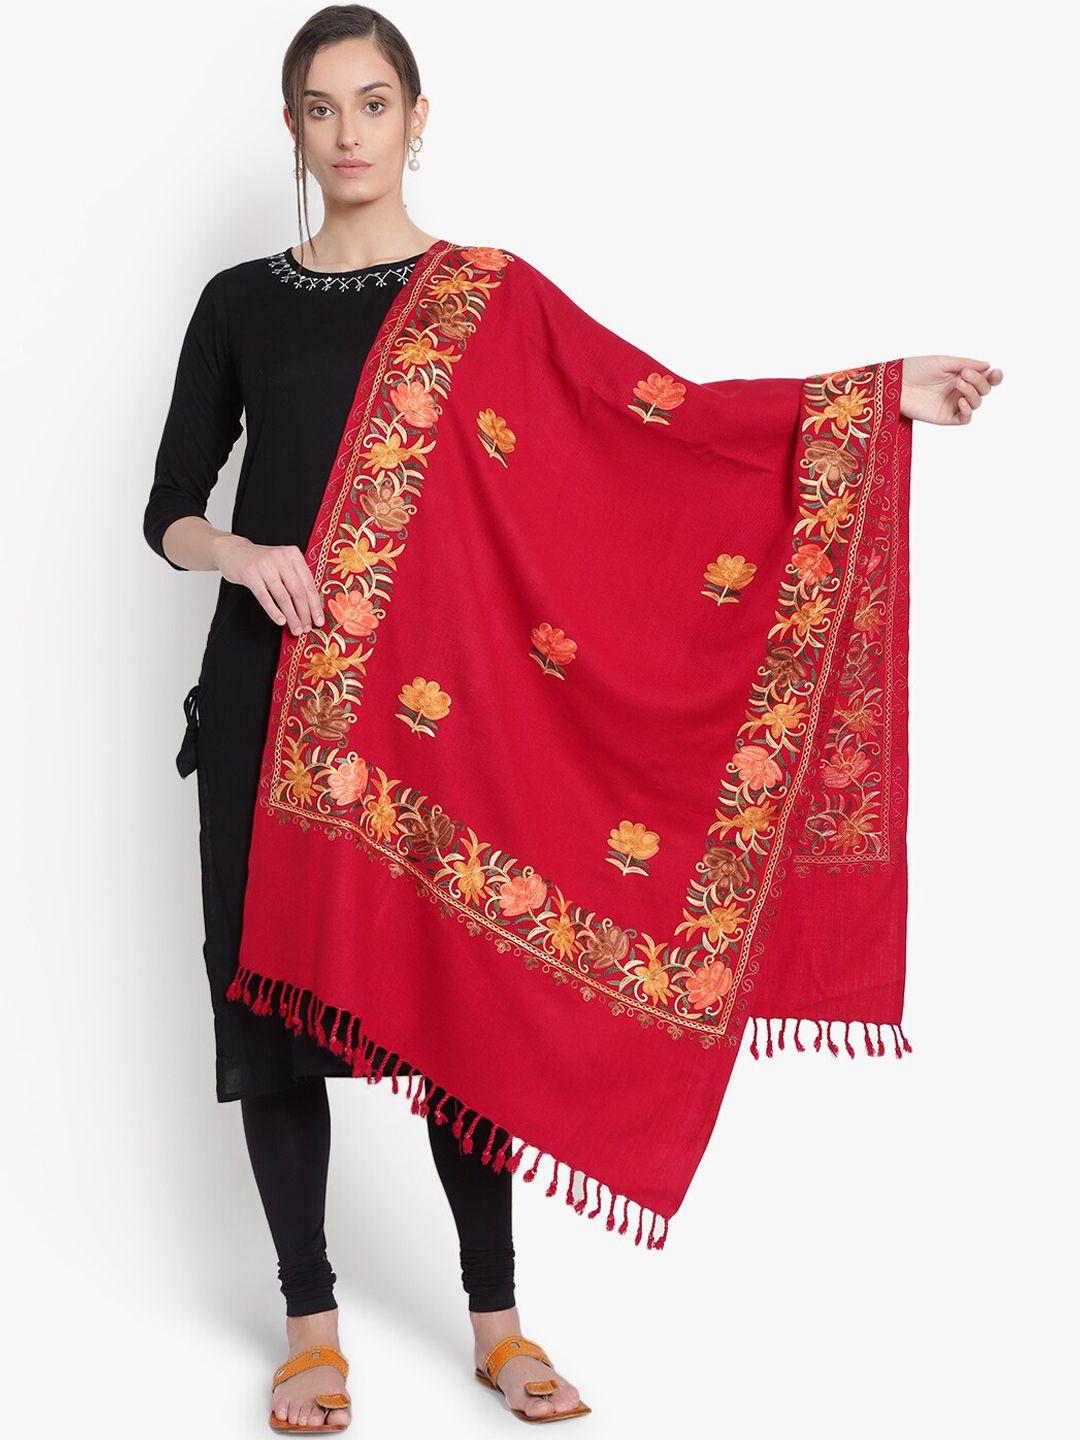 mizash women red floral embroidered shawl